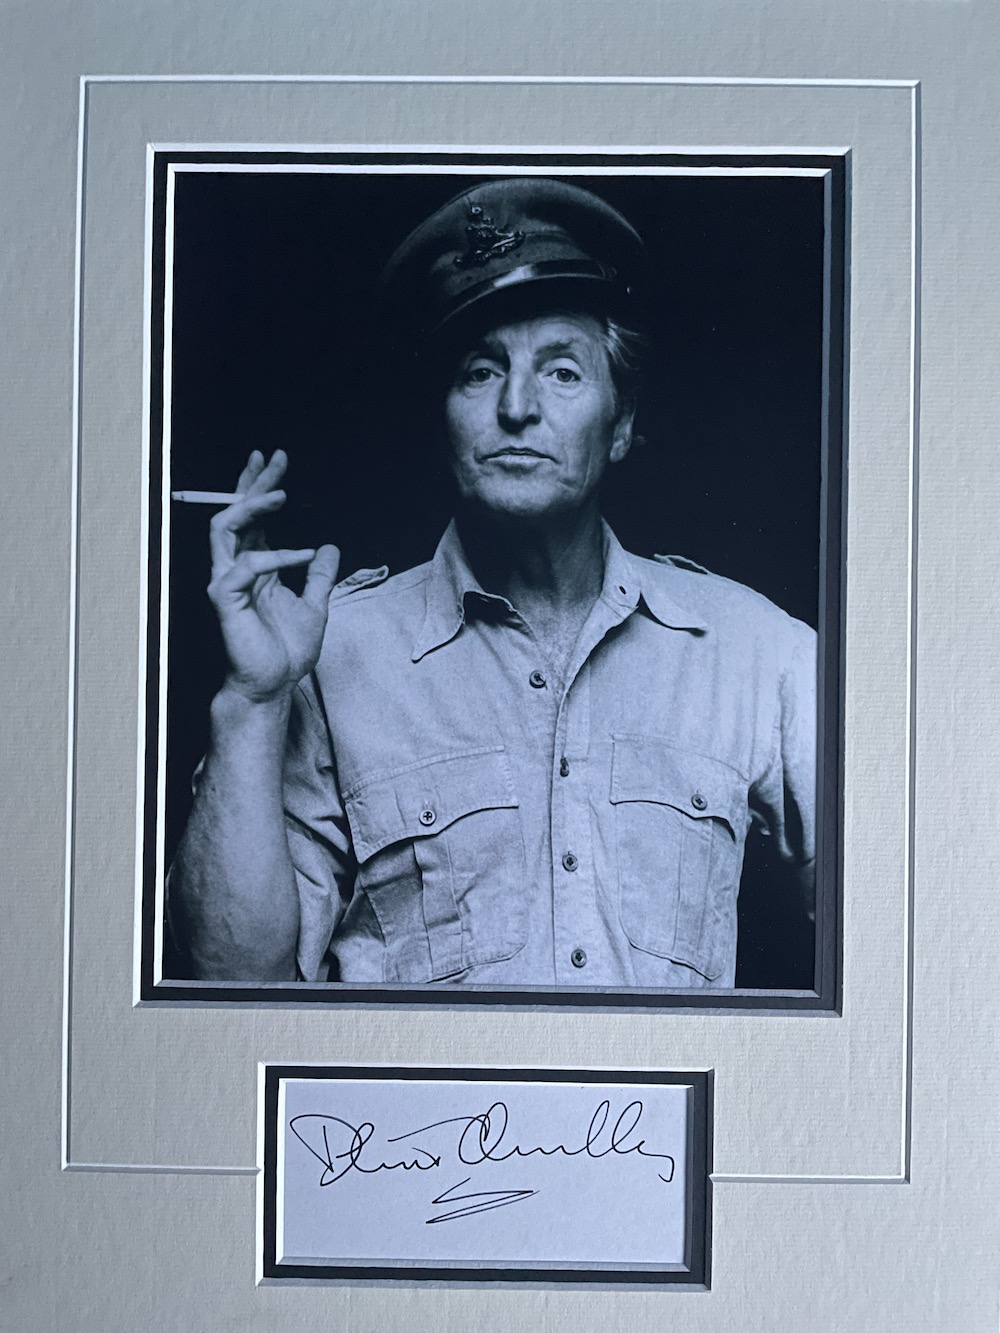 Dennis Quilley Late Great British Actor Signed Display. Good Condition. All autographs come with a